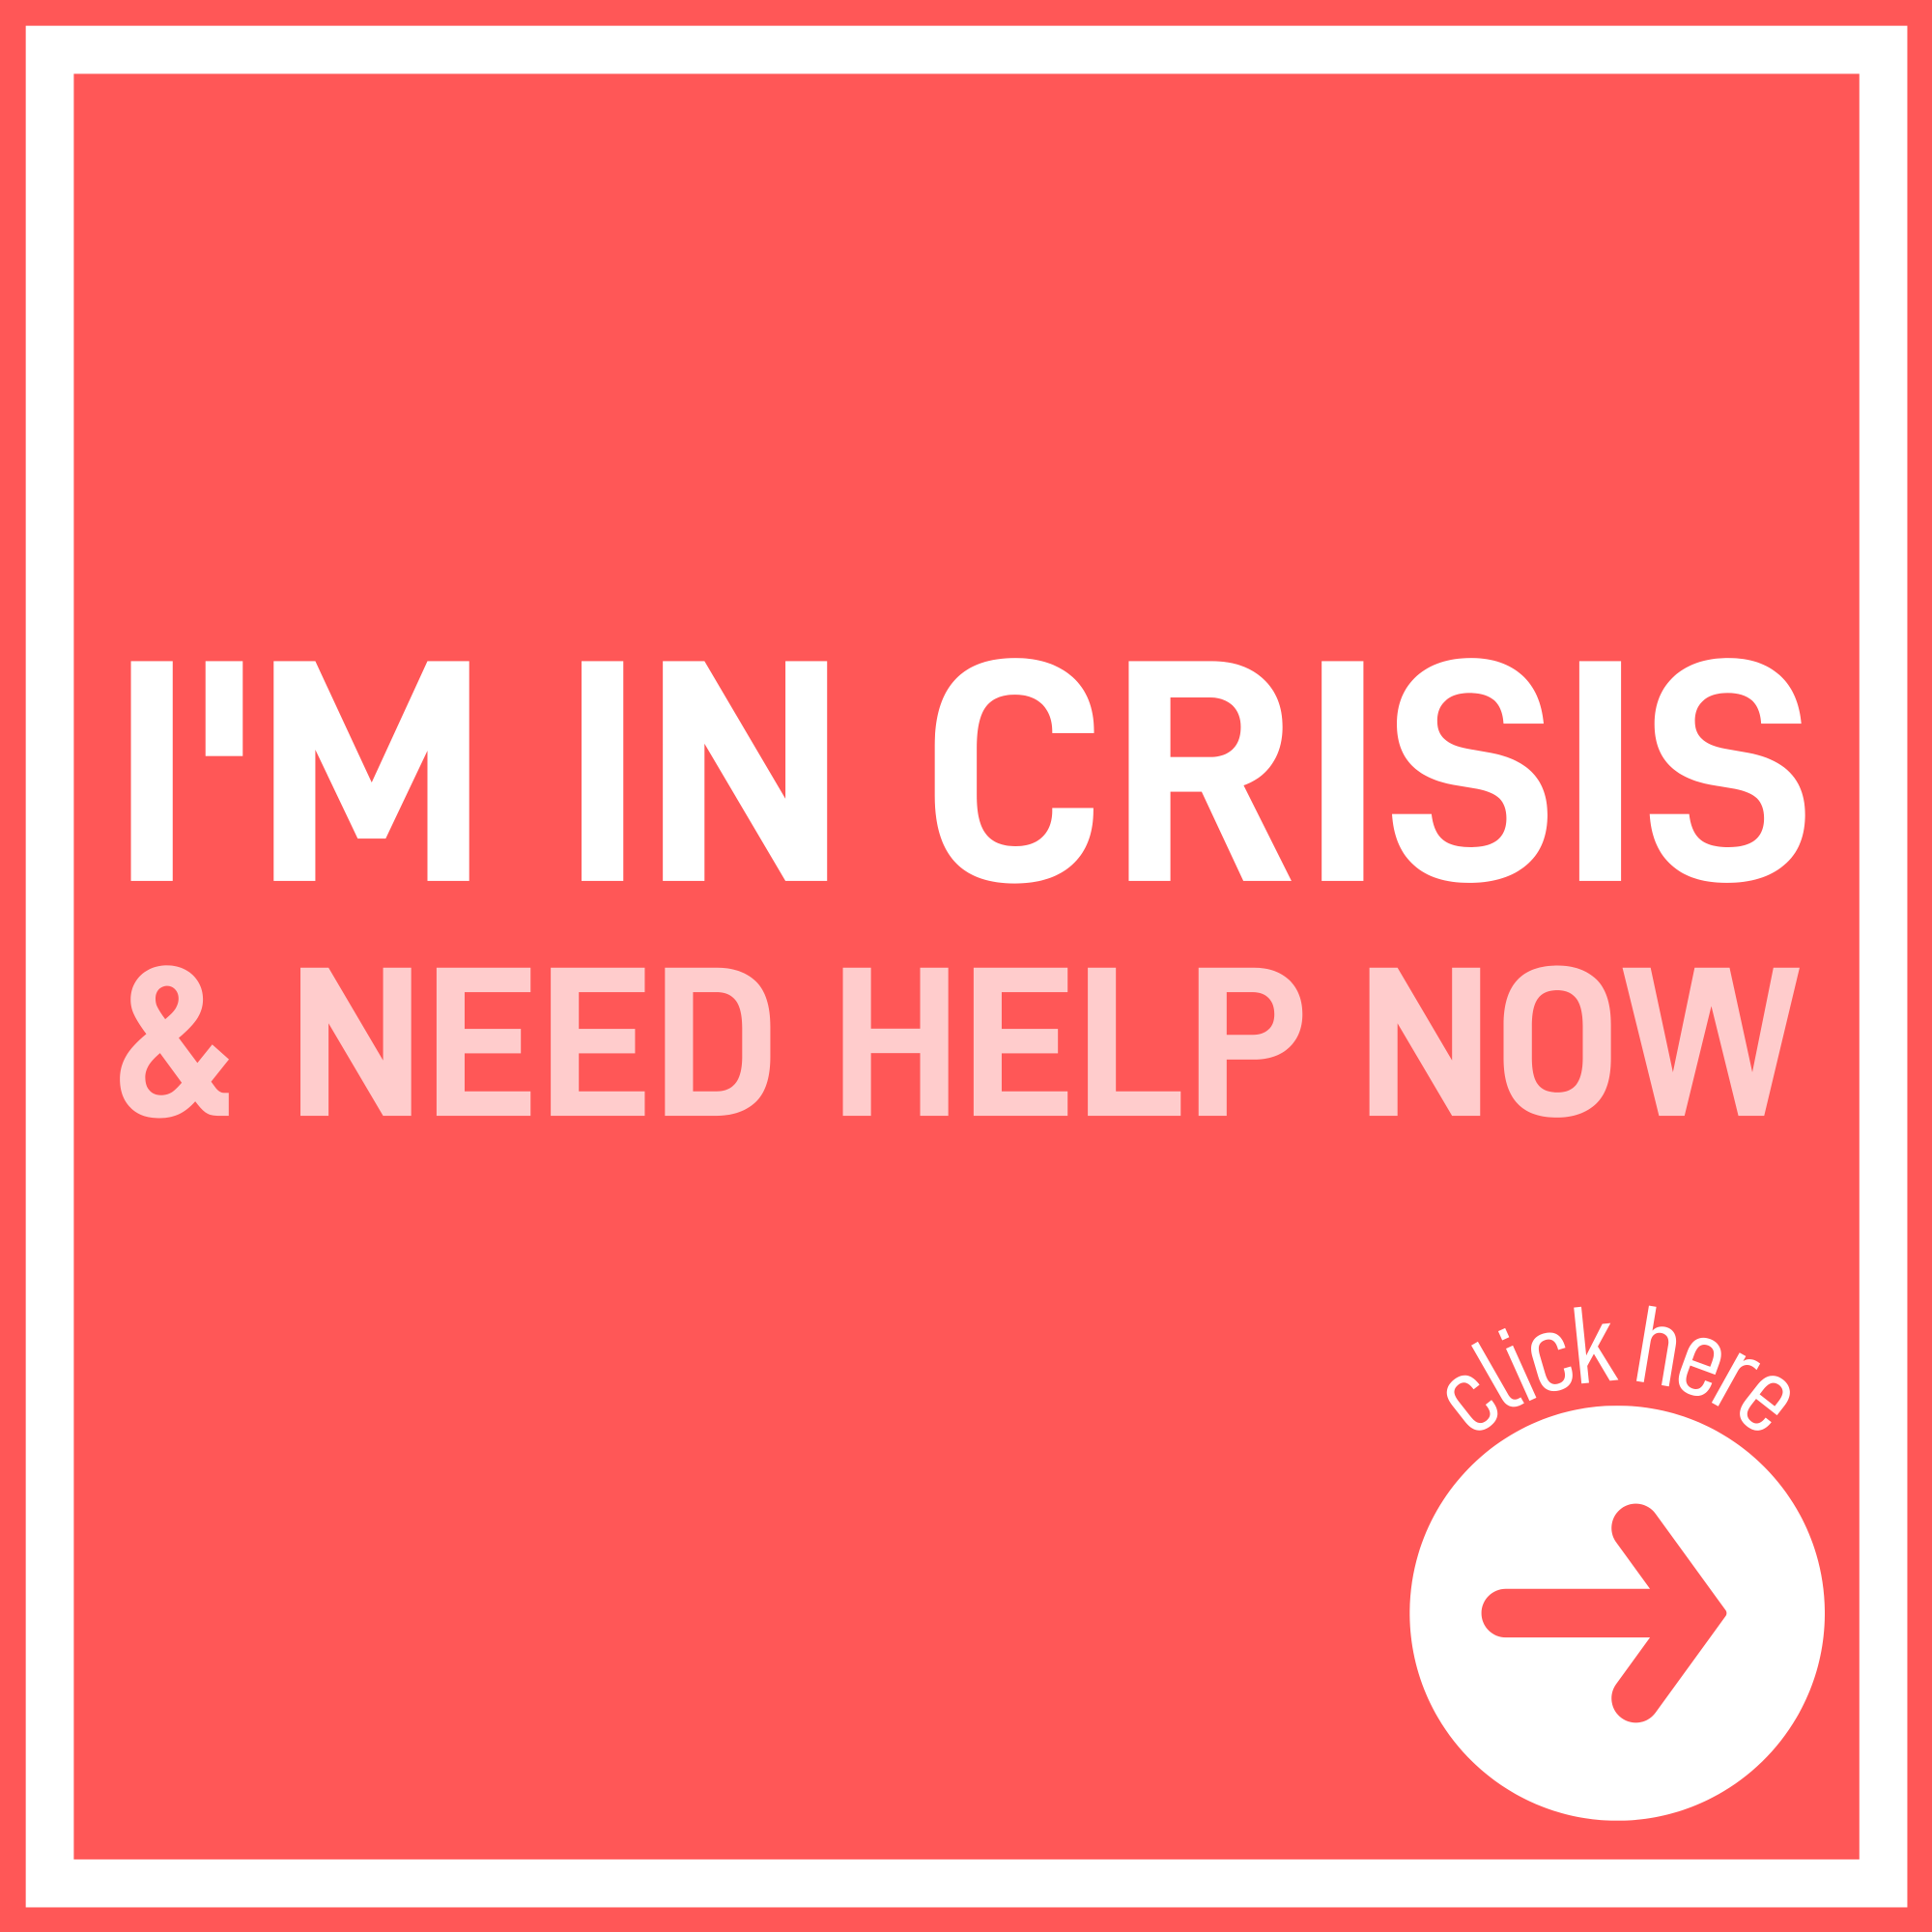 Red button with white text that states "I'm in crisis and need help now"